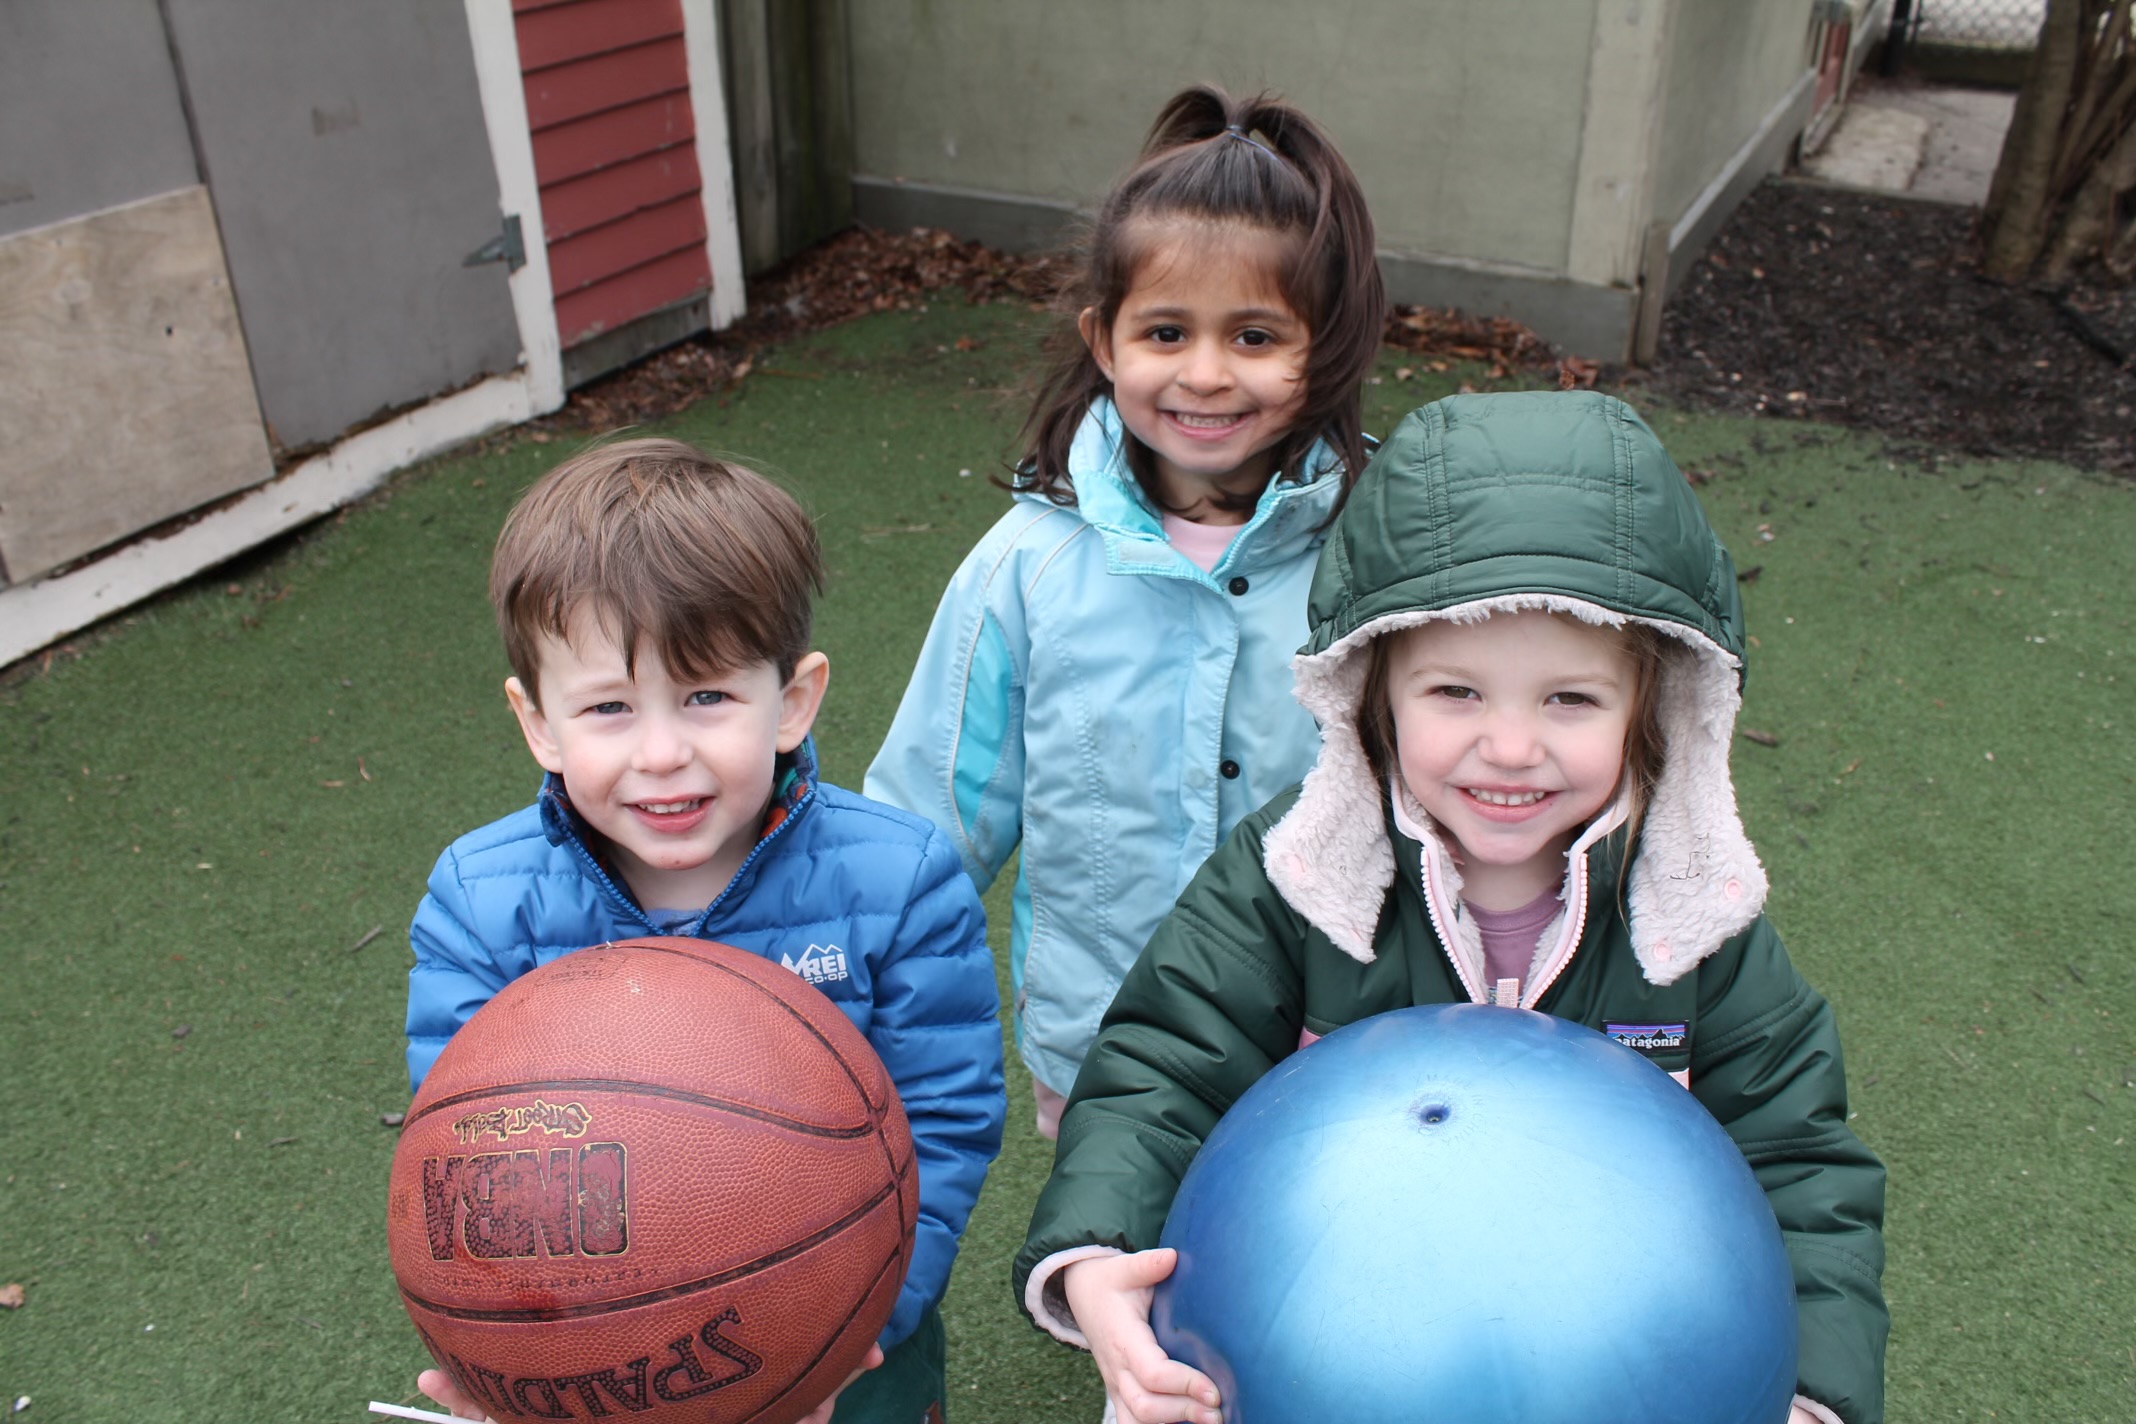 Three children outside at USES in jackets holding a basketball and bouncy ball, looking up at the camera and smiling